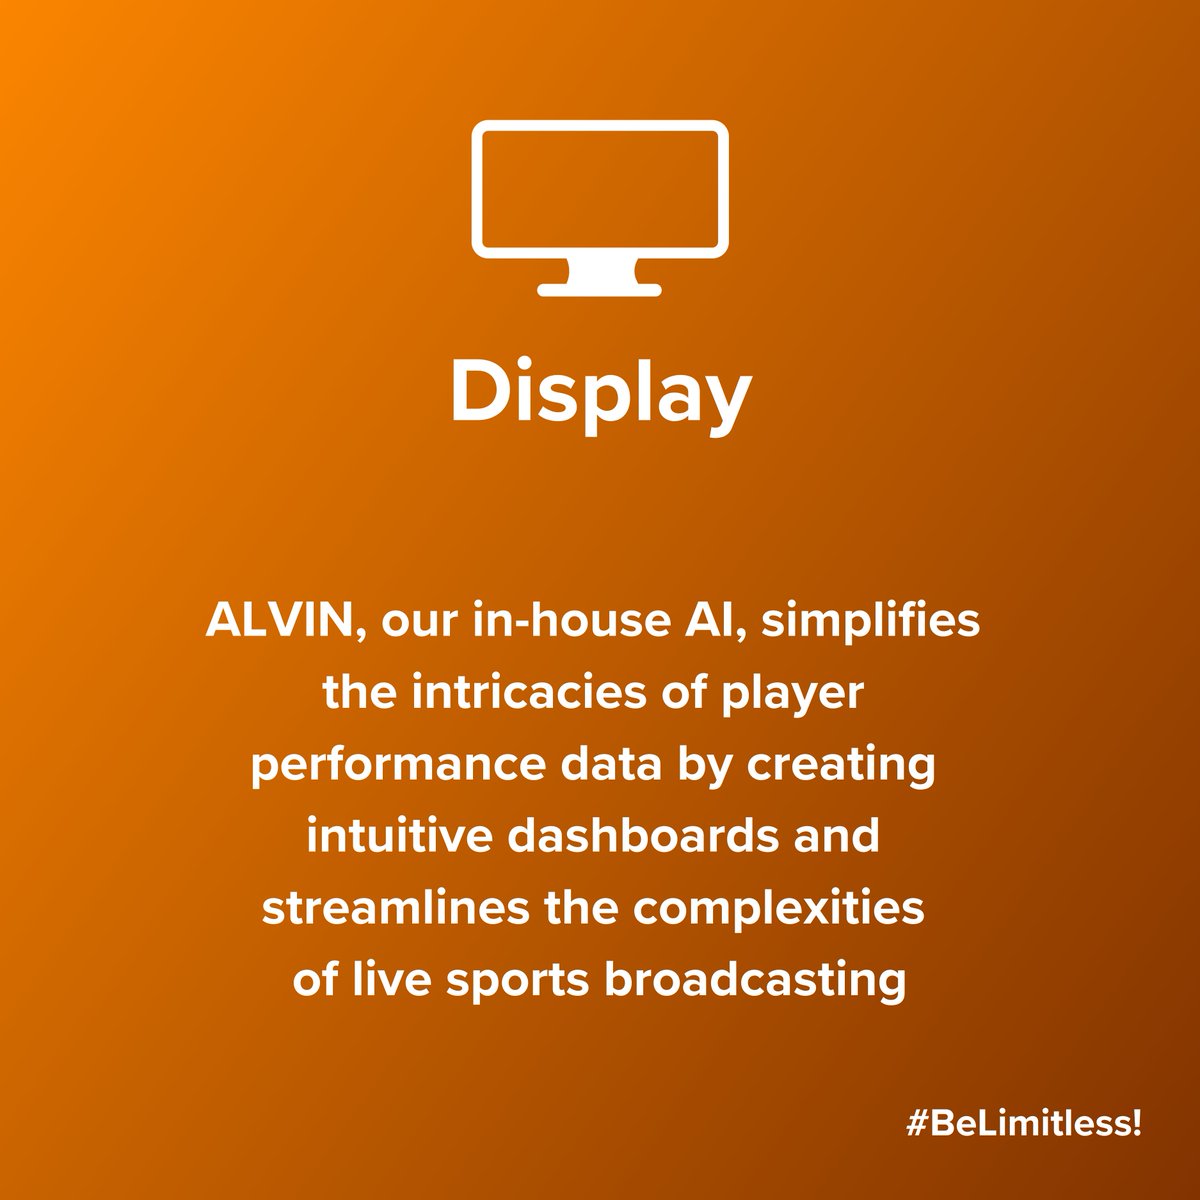 TECH  AT PLAY is the ultimate analytics ecosystem for athletes. It automatically records, categorizes, and analyzes performance while live-streaming the game to sports fans across the globe, all from a  single platform.
#techatplay #belimitless #sportstech #sportsai #streaming